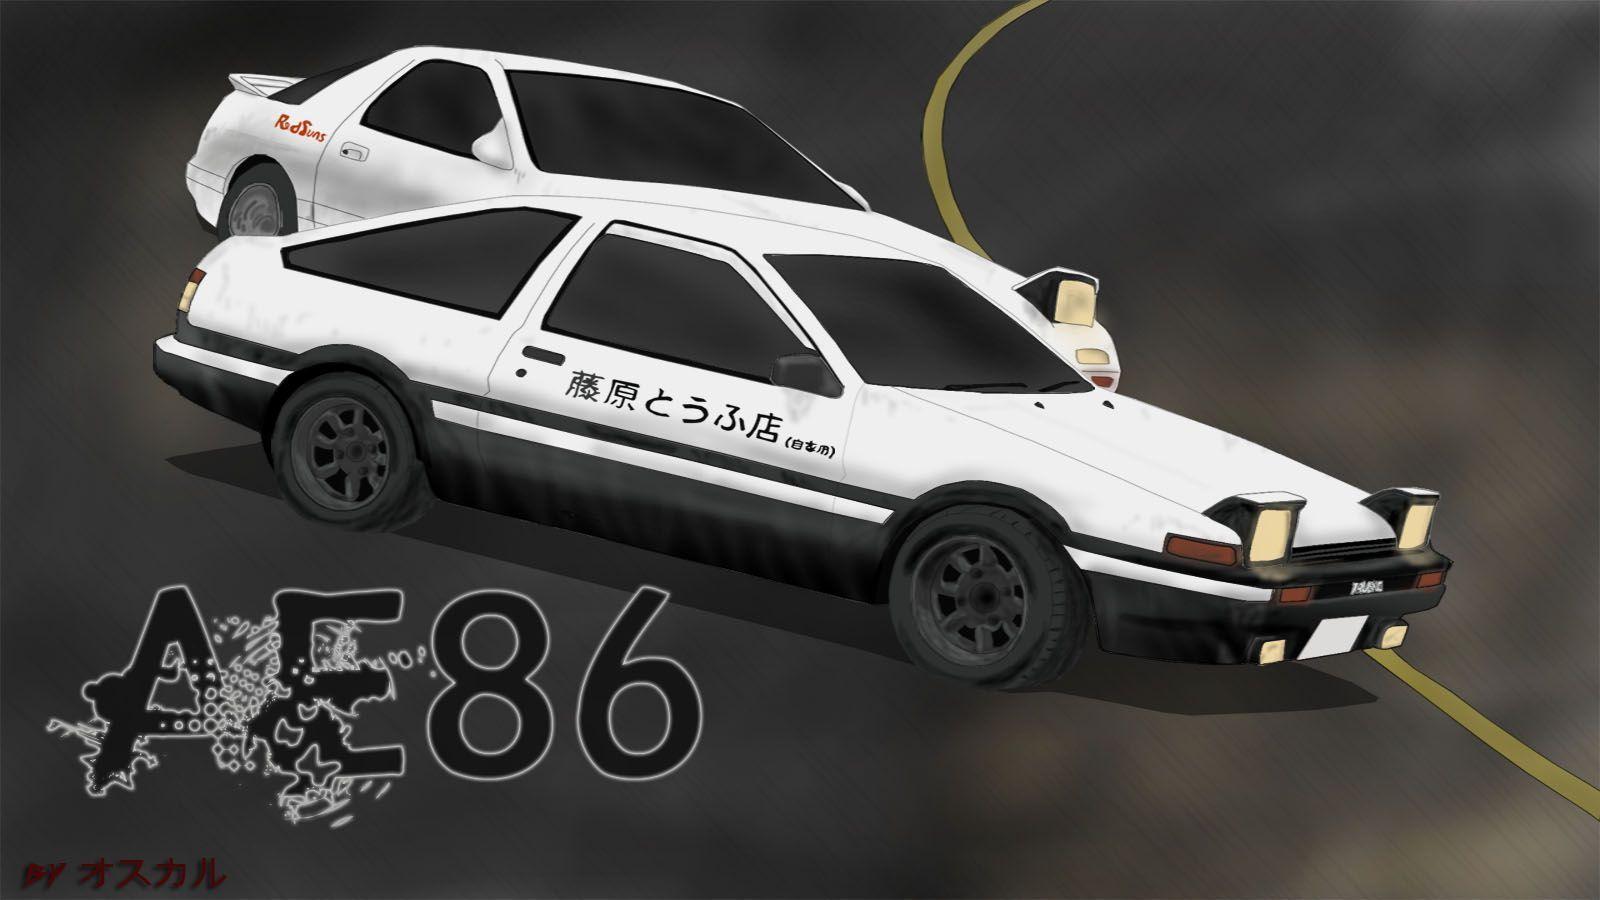 image For > Initial D Ae86 Wallpaper